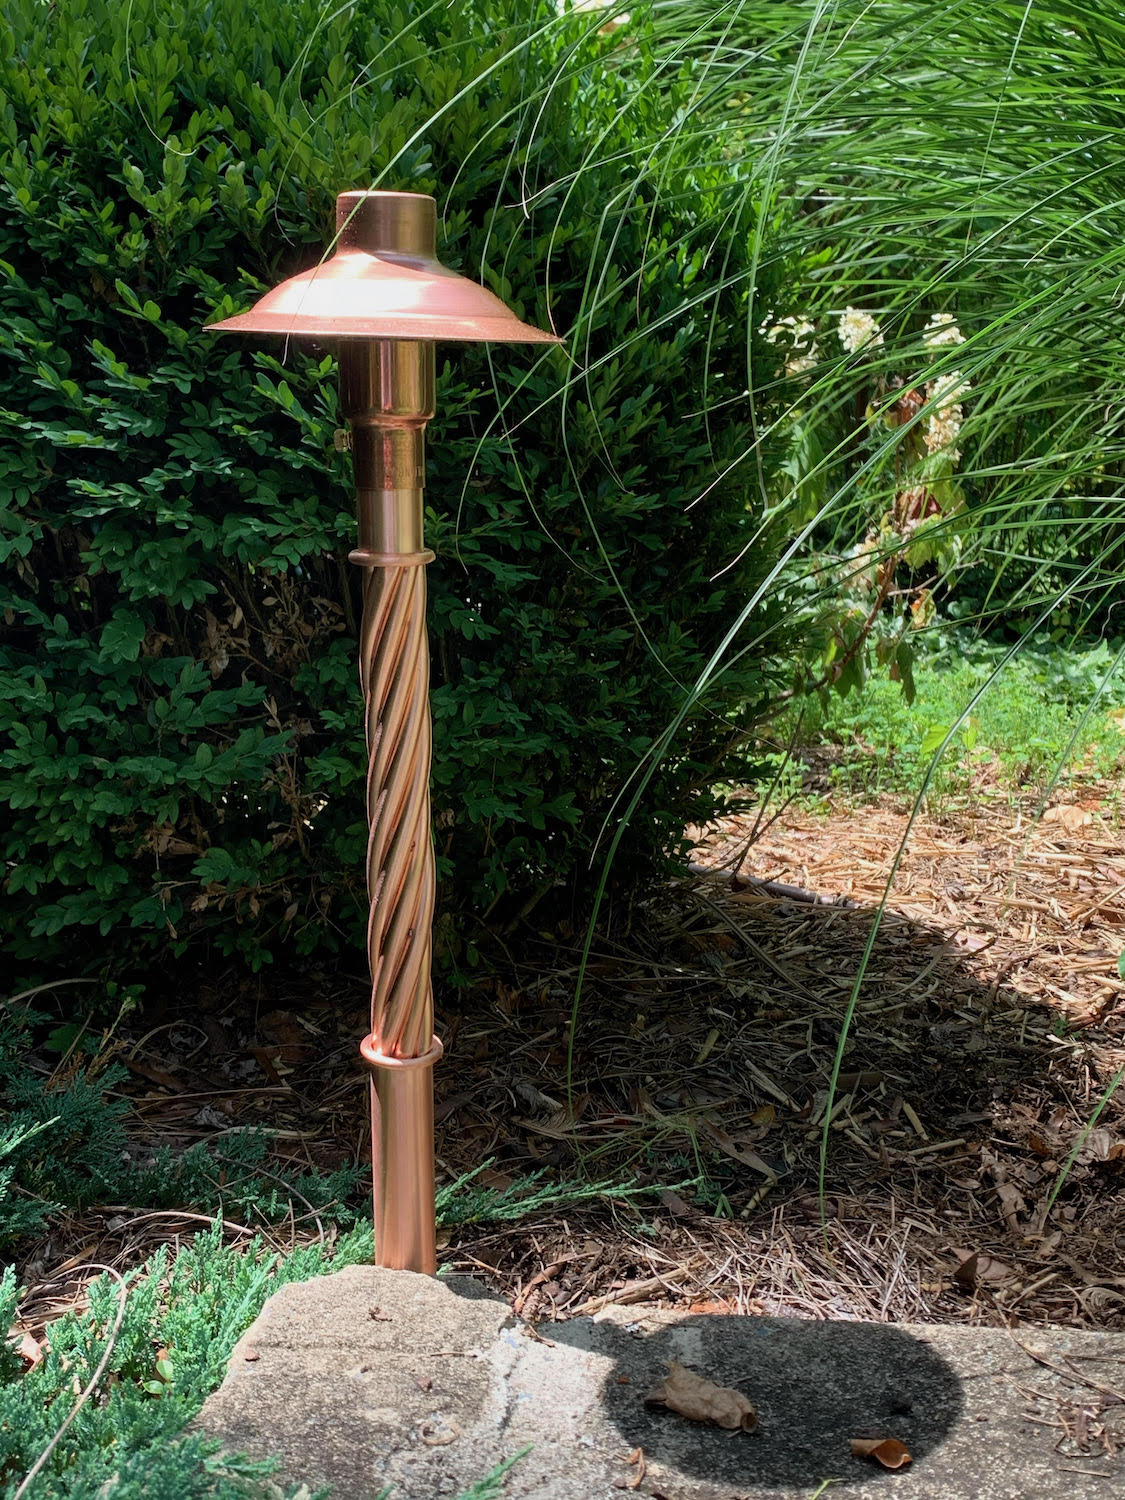 CopperMoon CM.700-10 12V Copper 6" Path Light Top, 20" Twisted Rope Stem With Stake